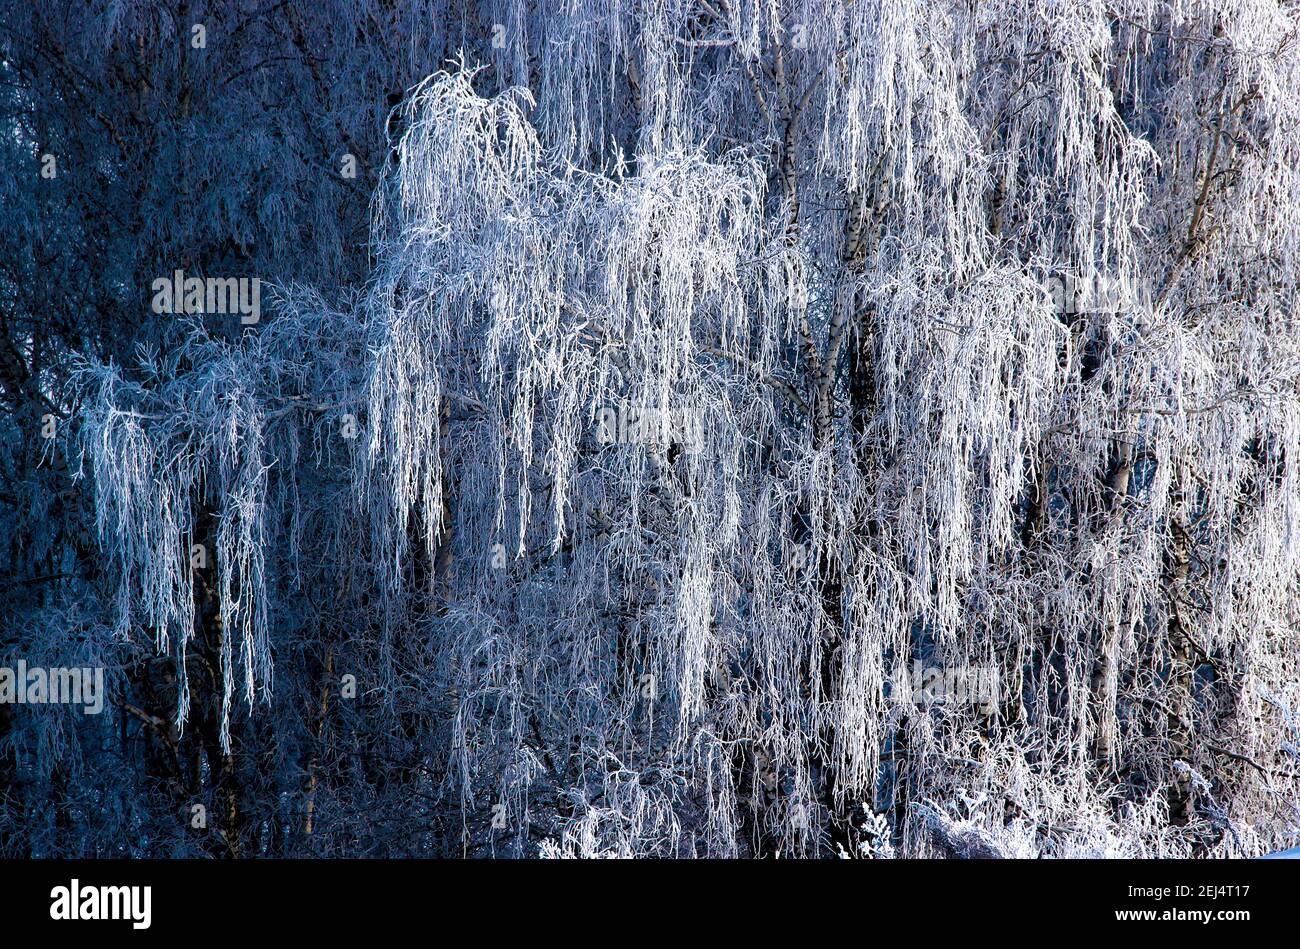 Close-up image of birch branches hanging down under the weight of hoarfrost. Stock Photo